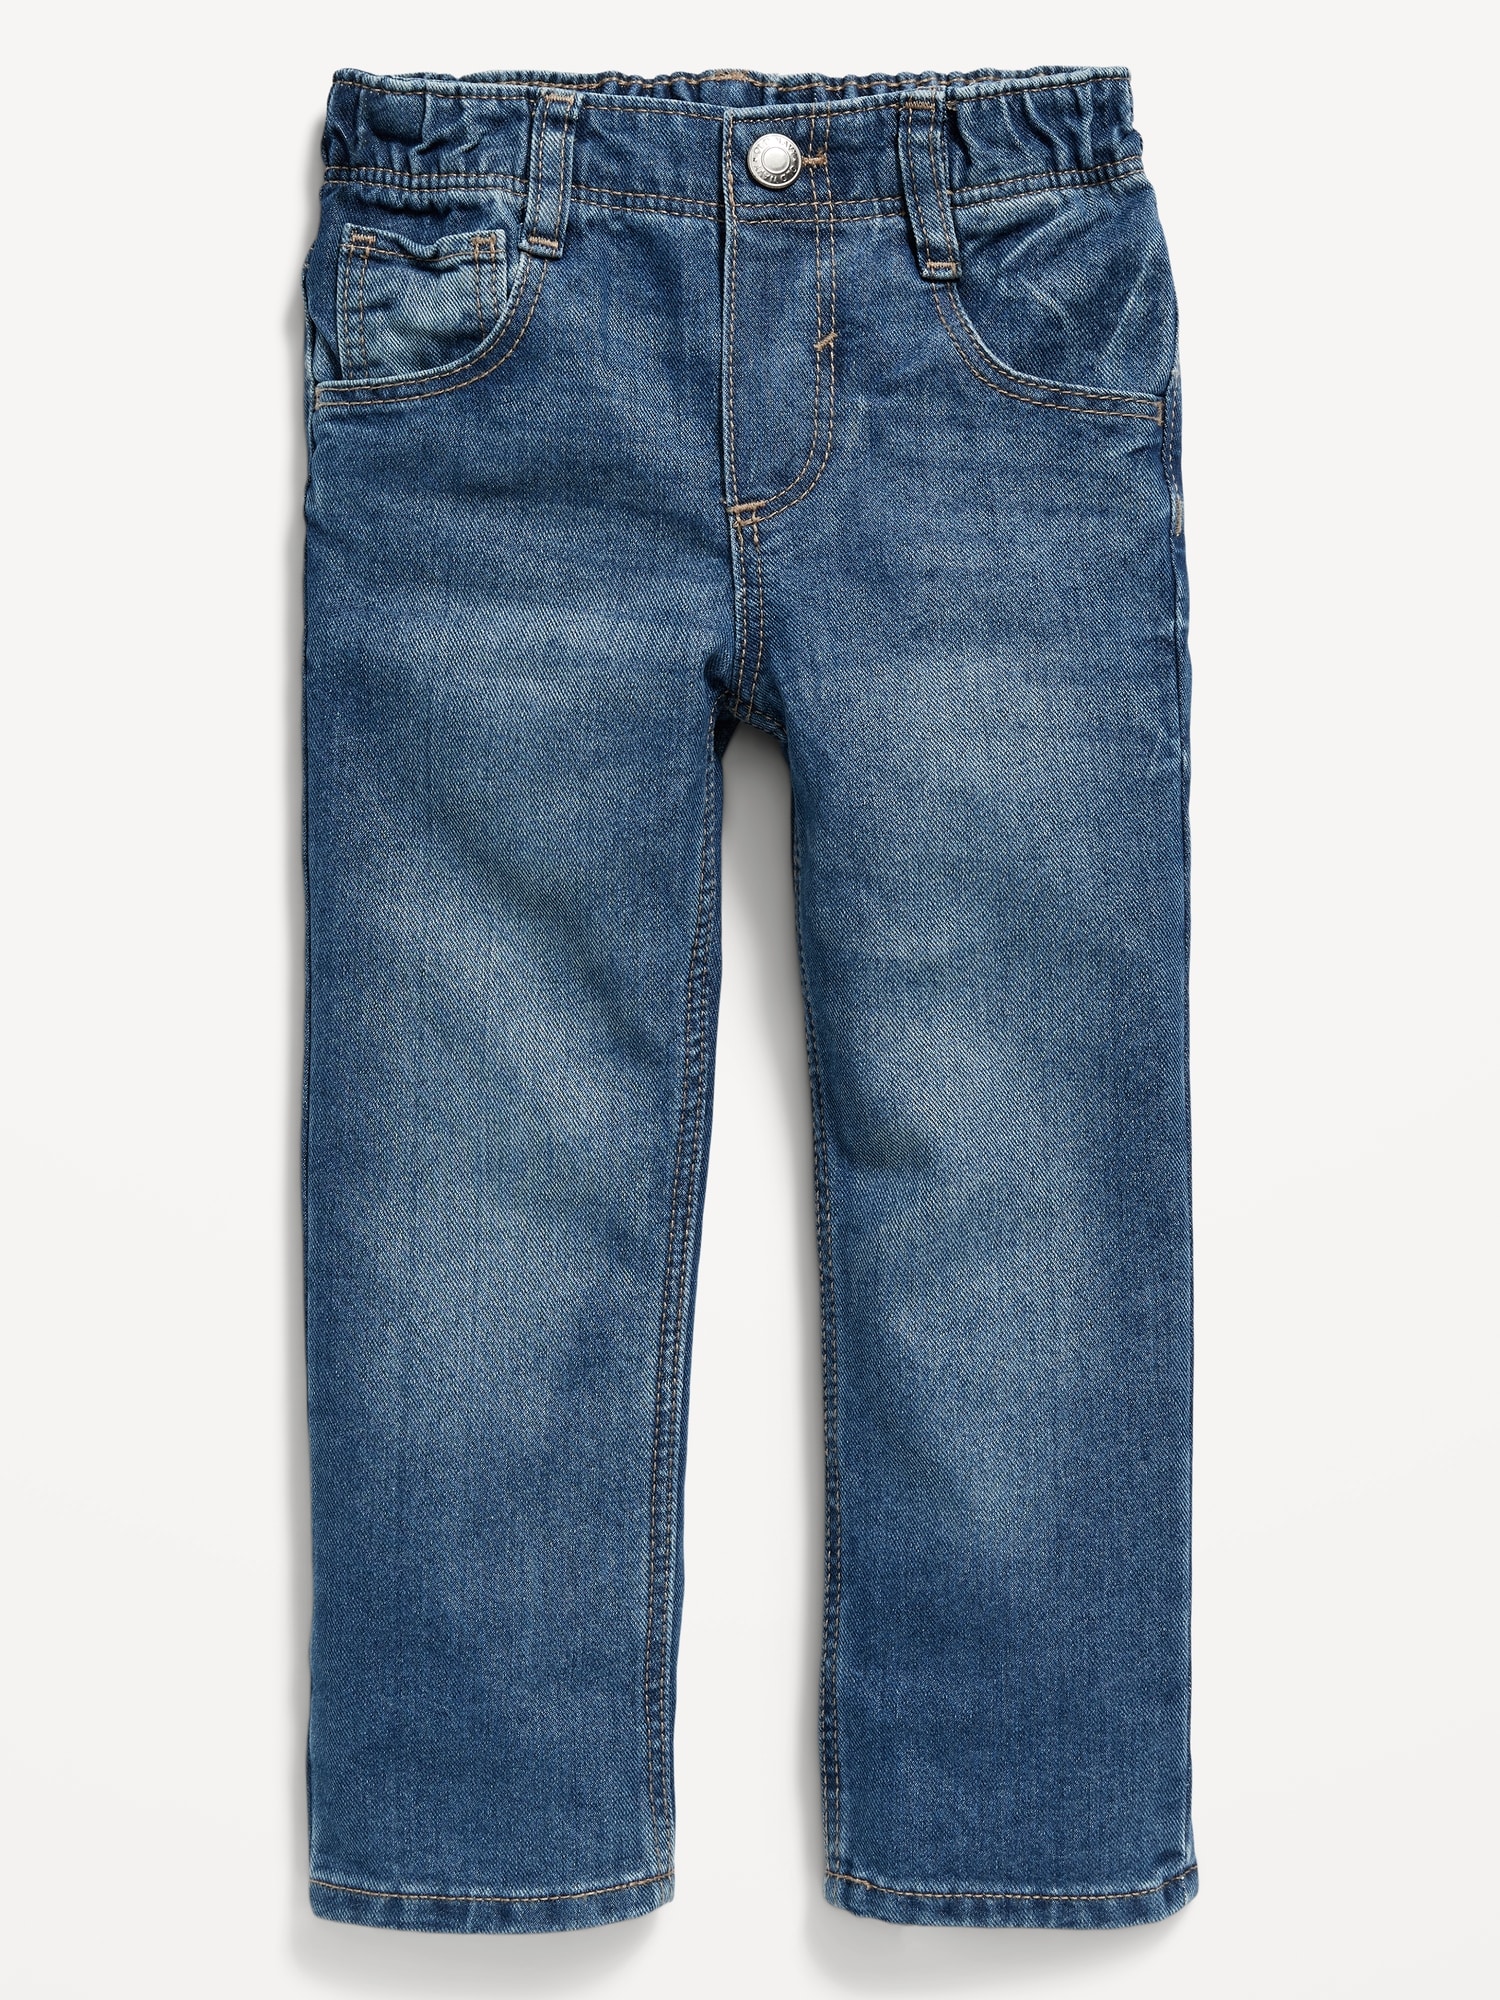 50% Off Old Navy Wow Jeans, Styles from $9.99